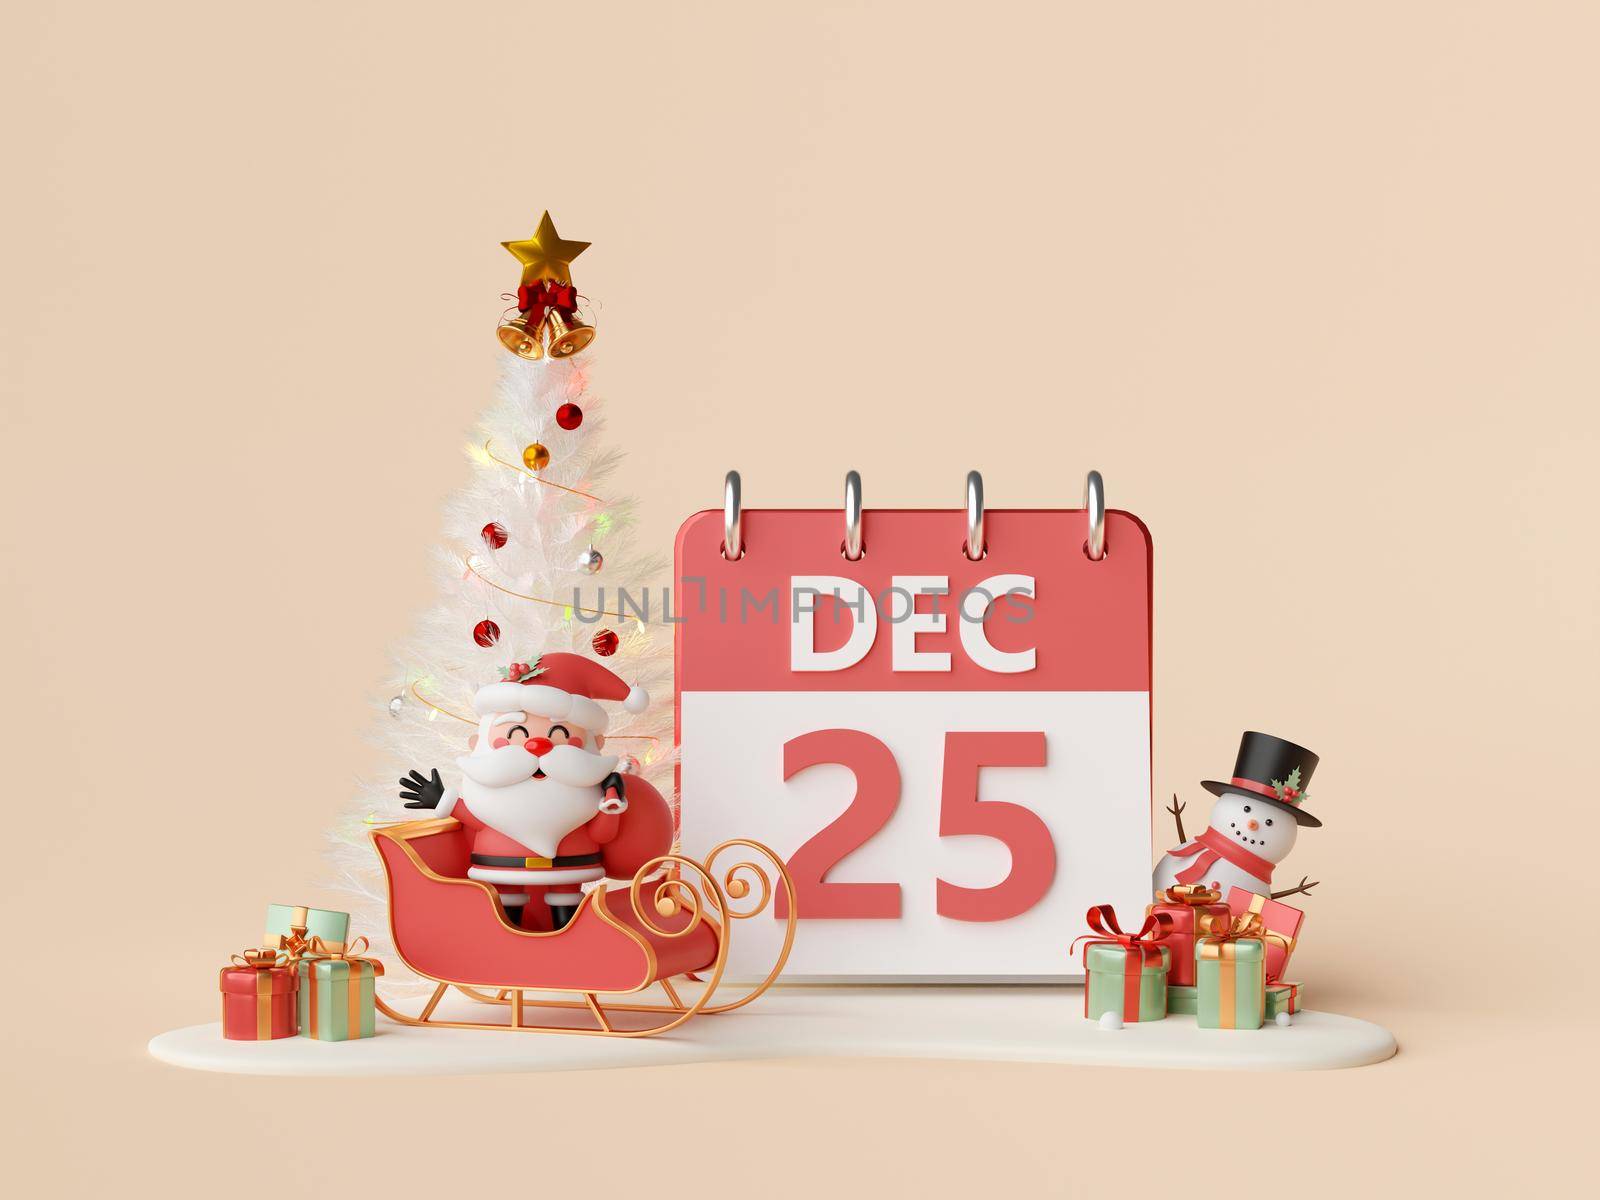 3d illustration of 25 Dec calendar with Santa Claus and Christmas tree, Merry Christmas by nutzchotwarut